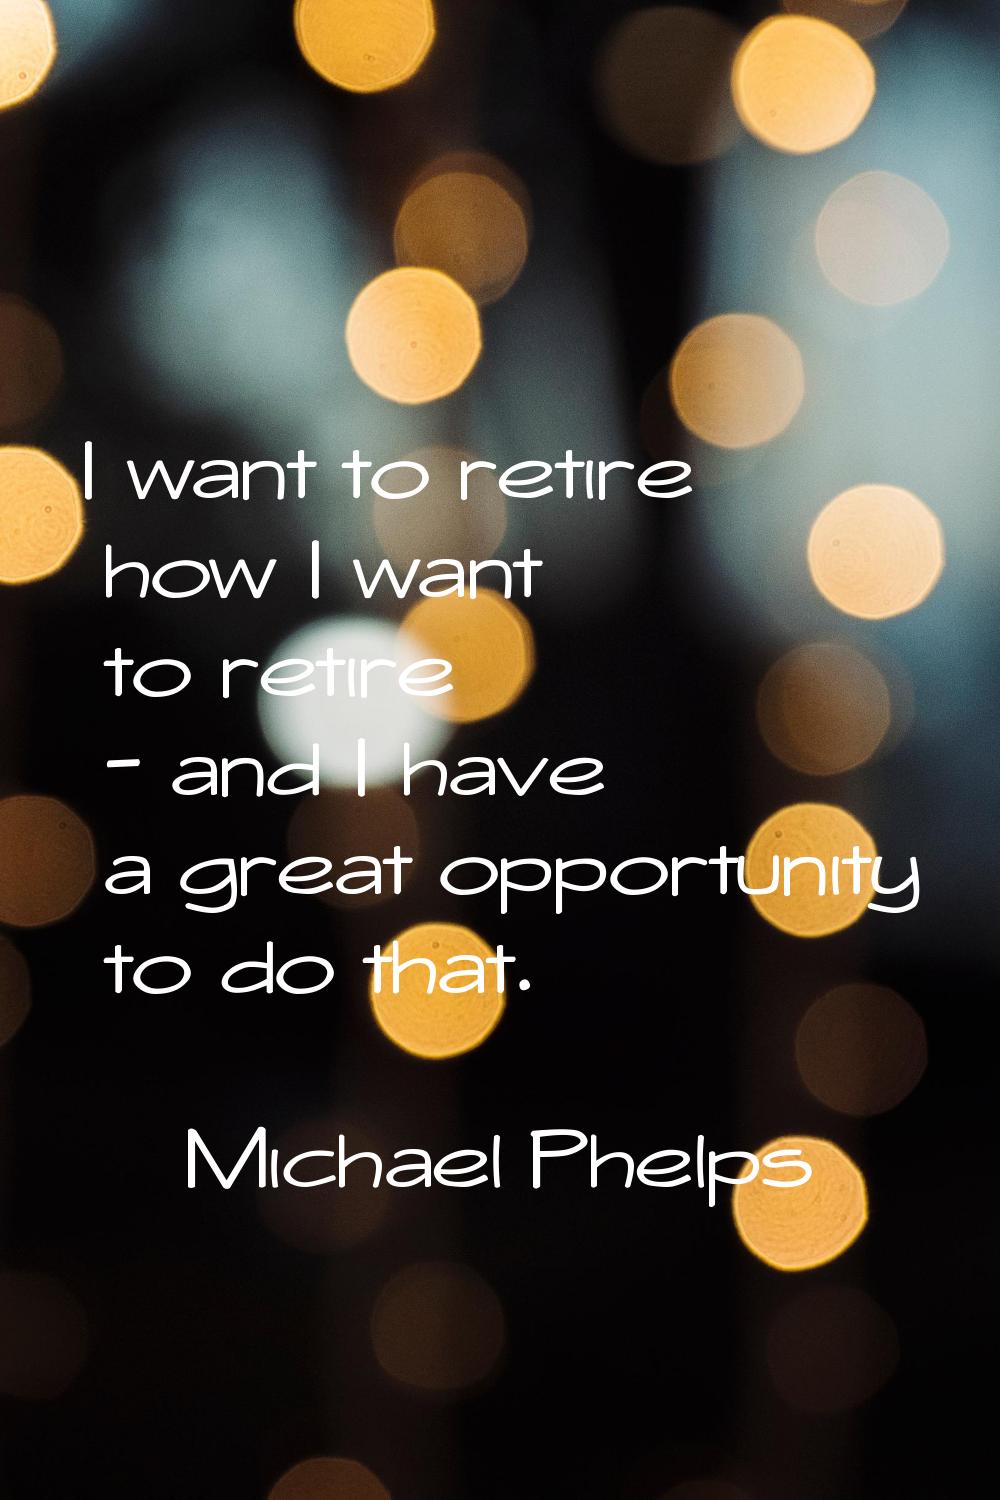 I want to retire how I want to retire - and I have a great opportunity to do that.